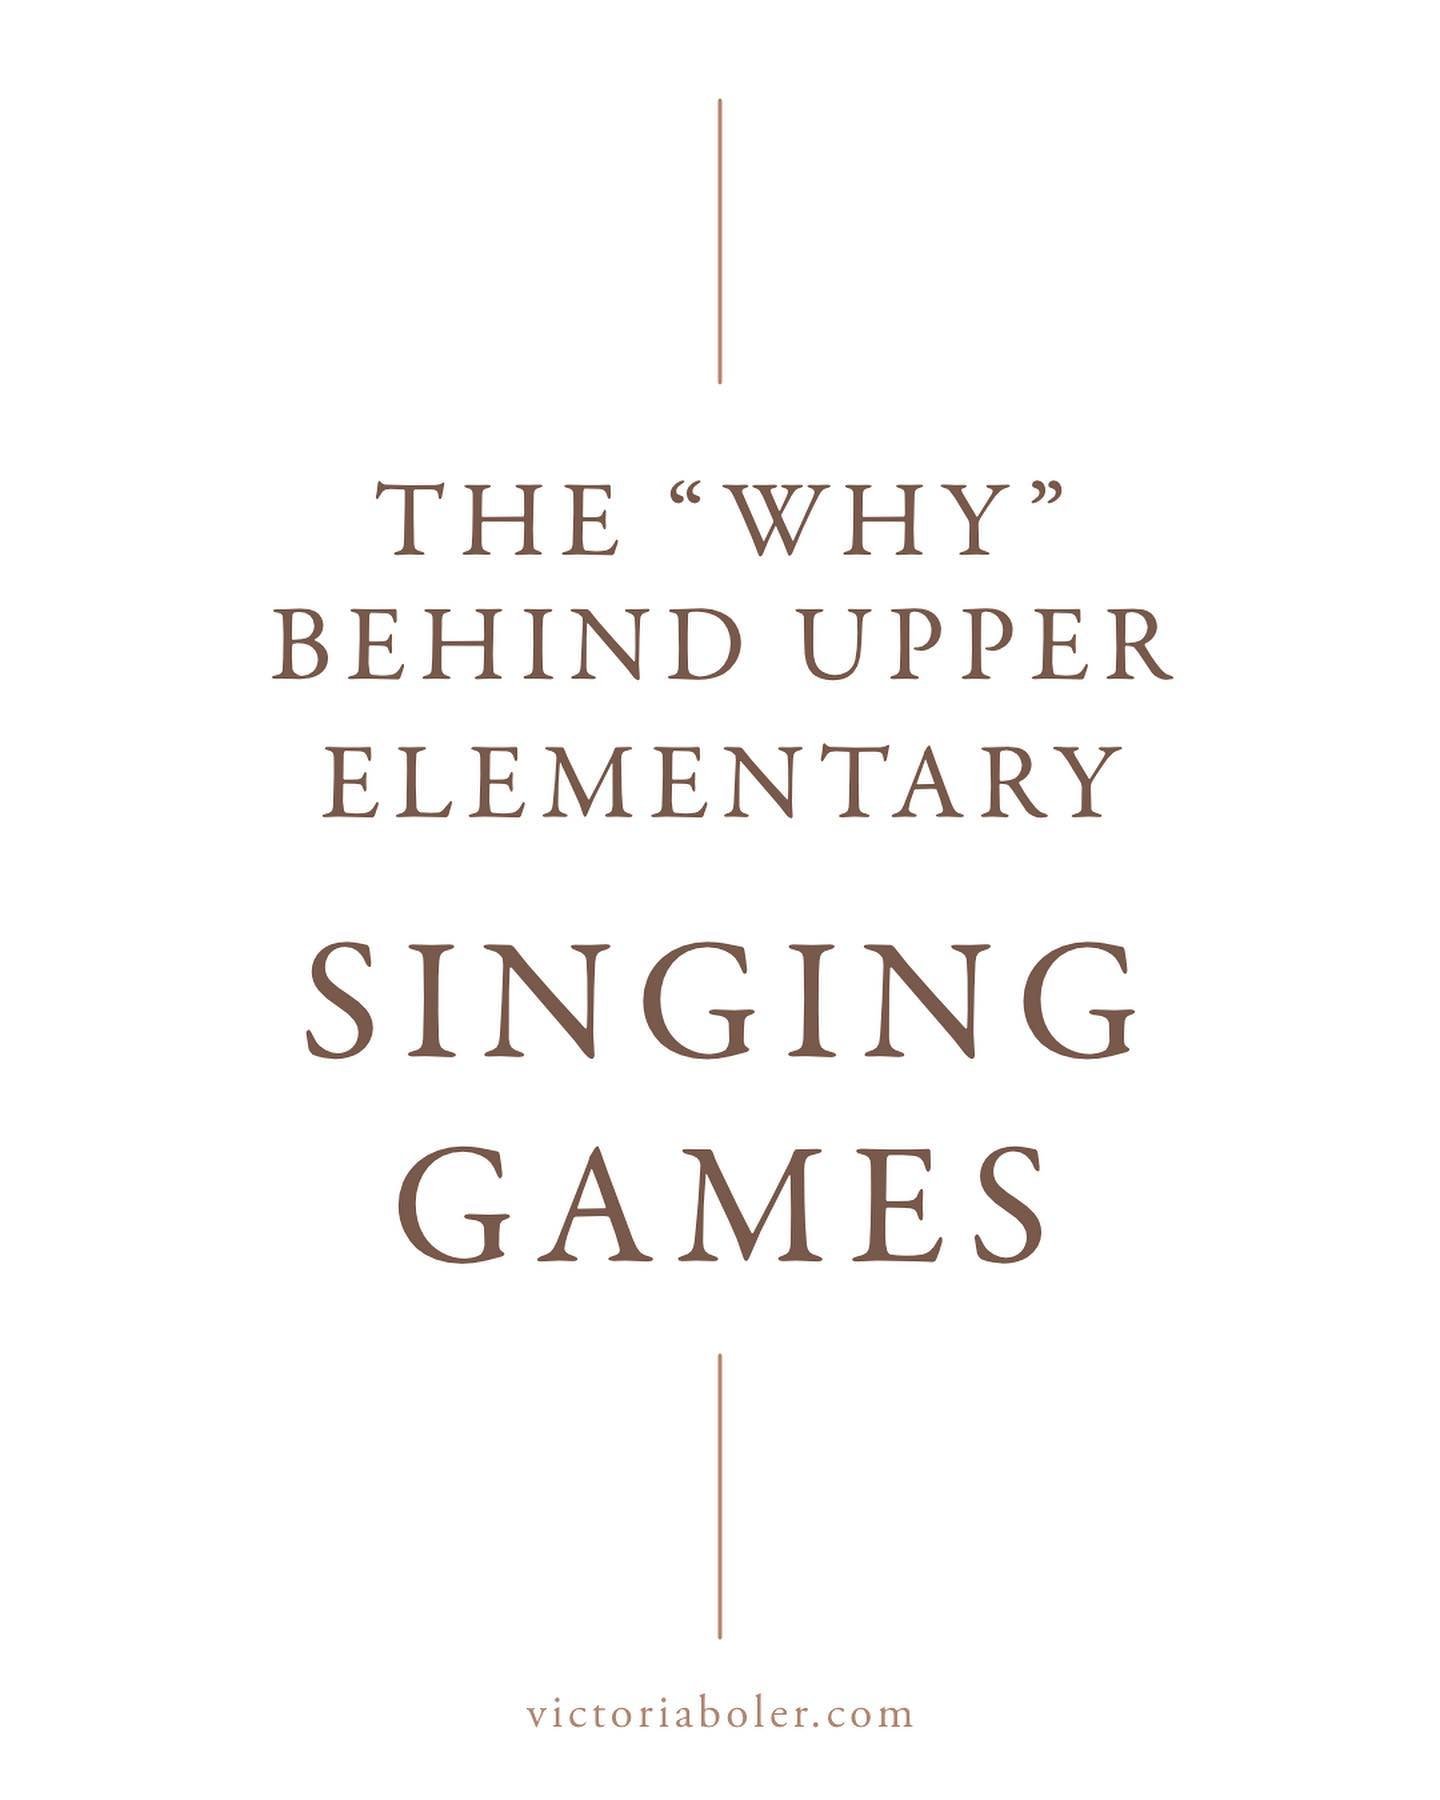 Just in time for the end of the year&hellip;.. upper elementary students still need to move!

Studies in this post: 

Roberts, C. (2015). Situational interest of fourth-grade children in music at school. Journal of Research in Music Education. 63(2).